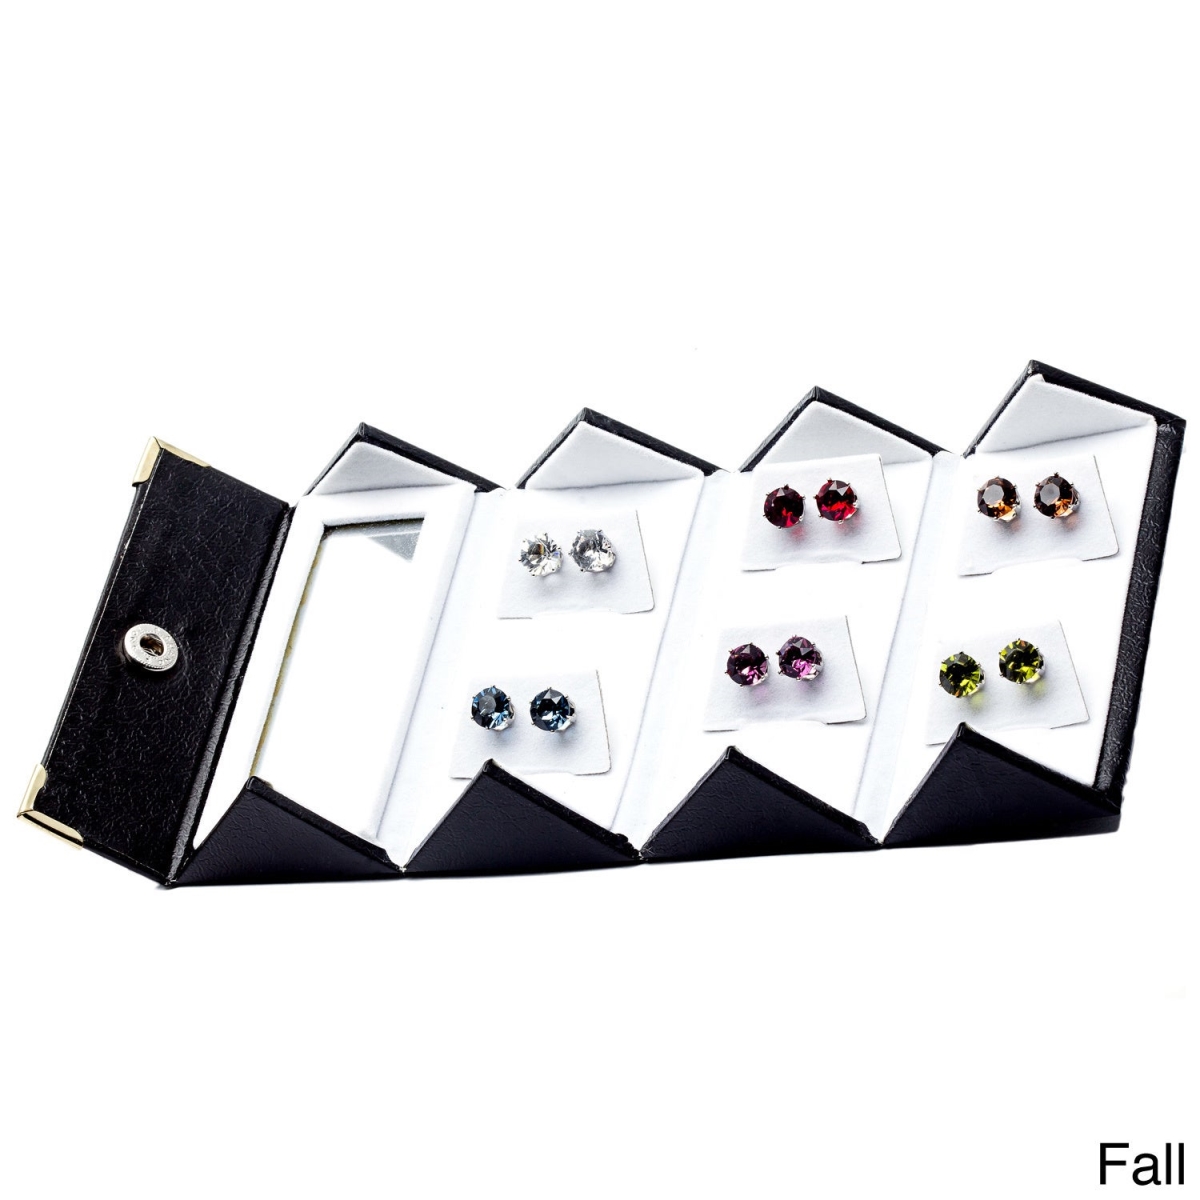 Picture of Alexa Starr  B7825/SIL 8mm Crystal Stud Earrings Made with Austrian Crystal Elements (Set of 6)